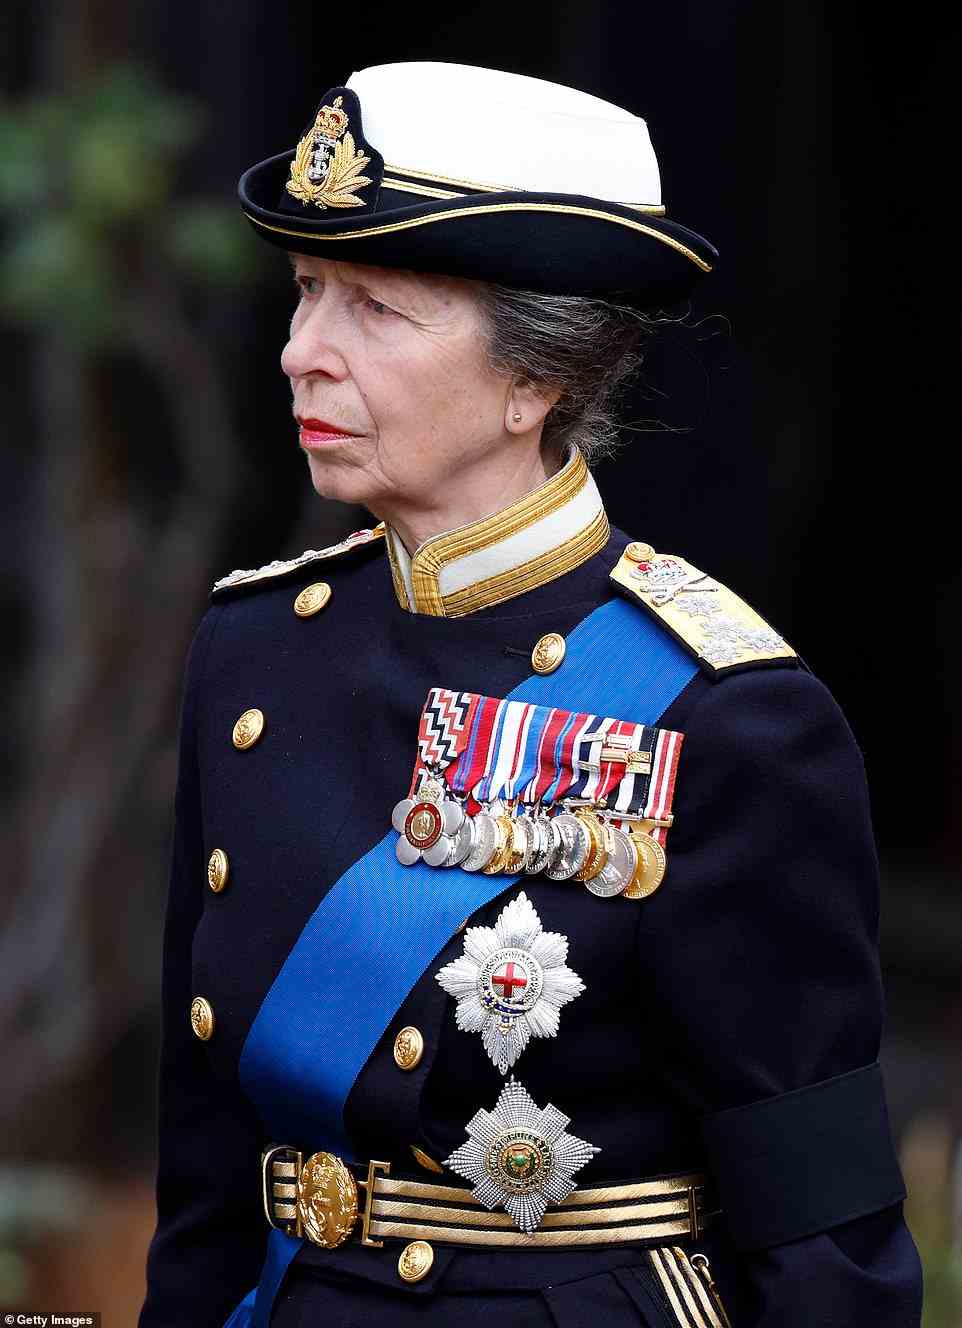 Pictured: Princess Anne, who is expected to step in among other royals to conduct routine duties when King Charles is out of the country